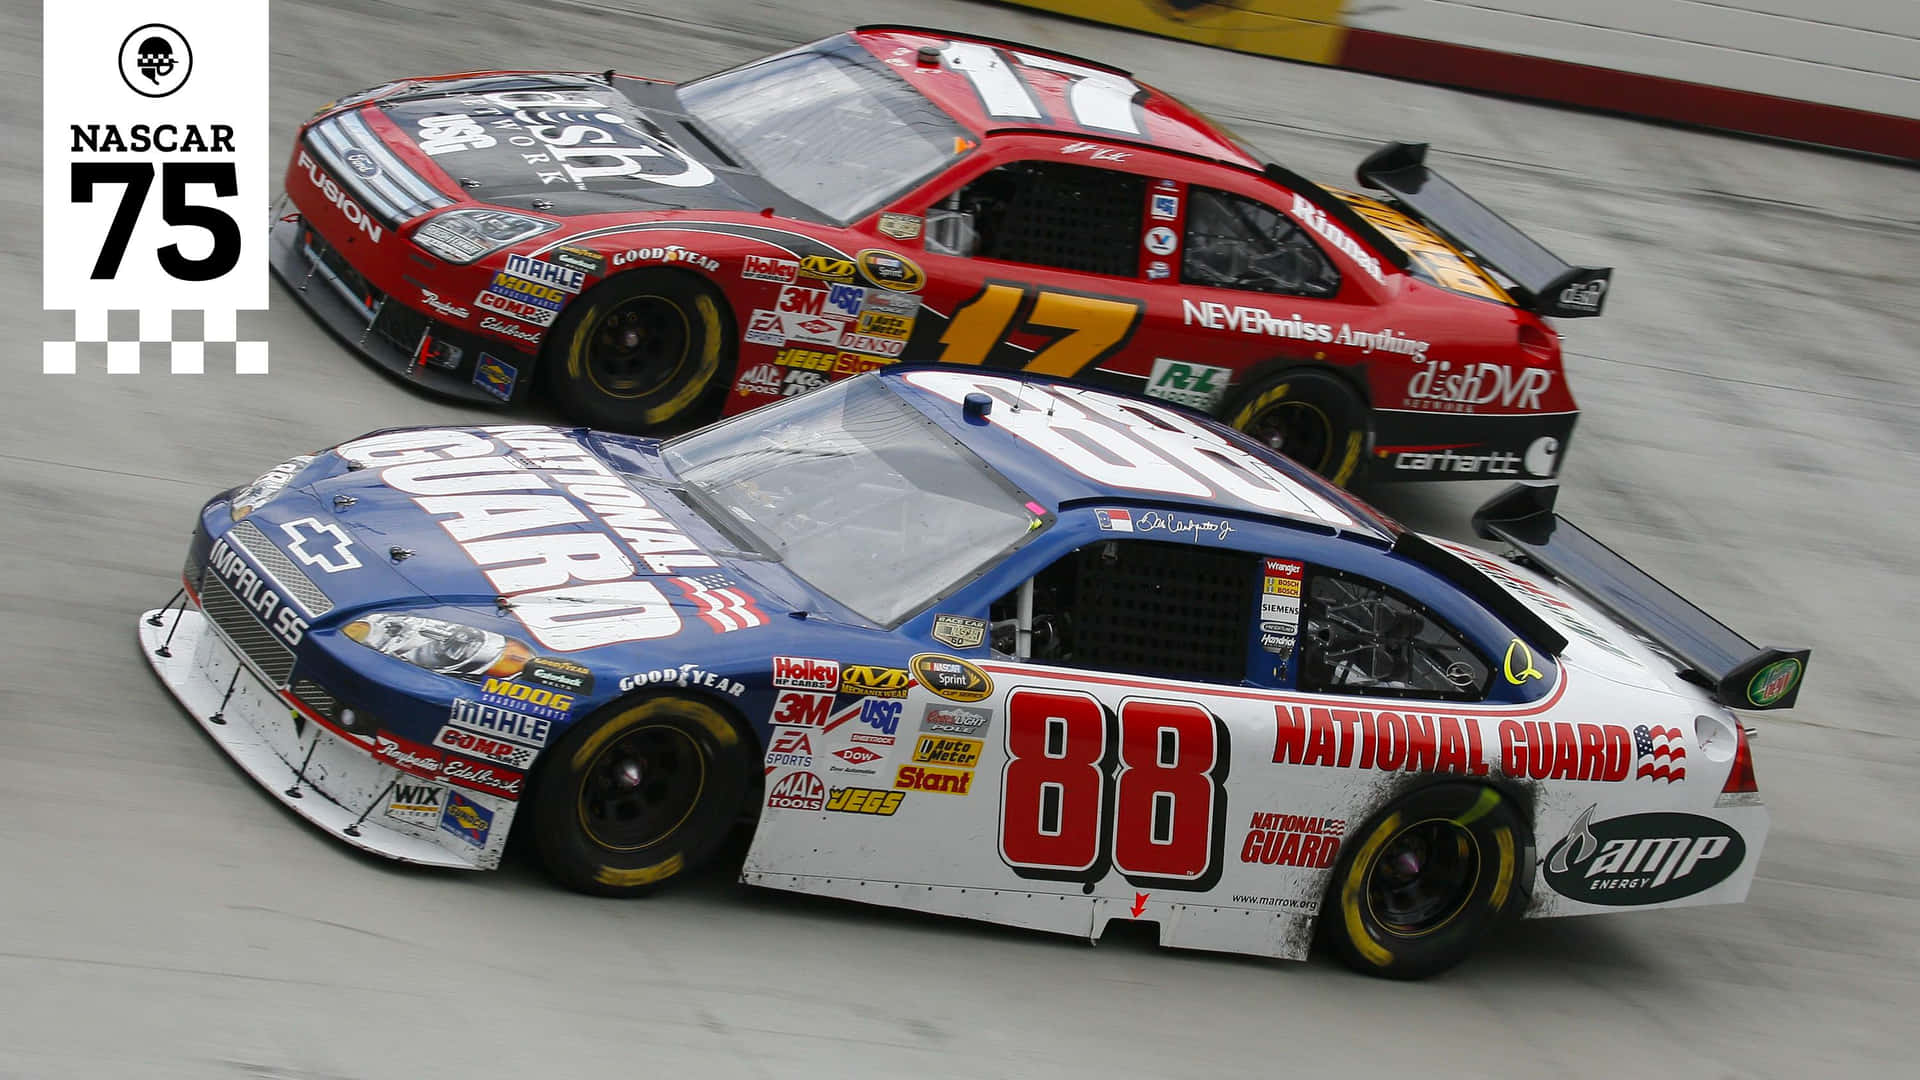 Two Nascar Cars Racing On A Track